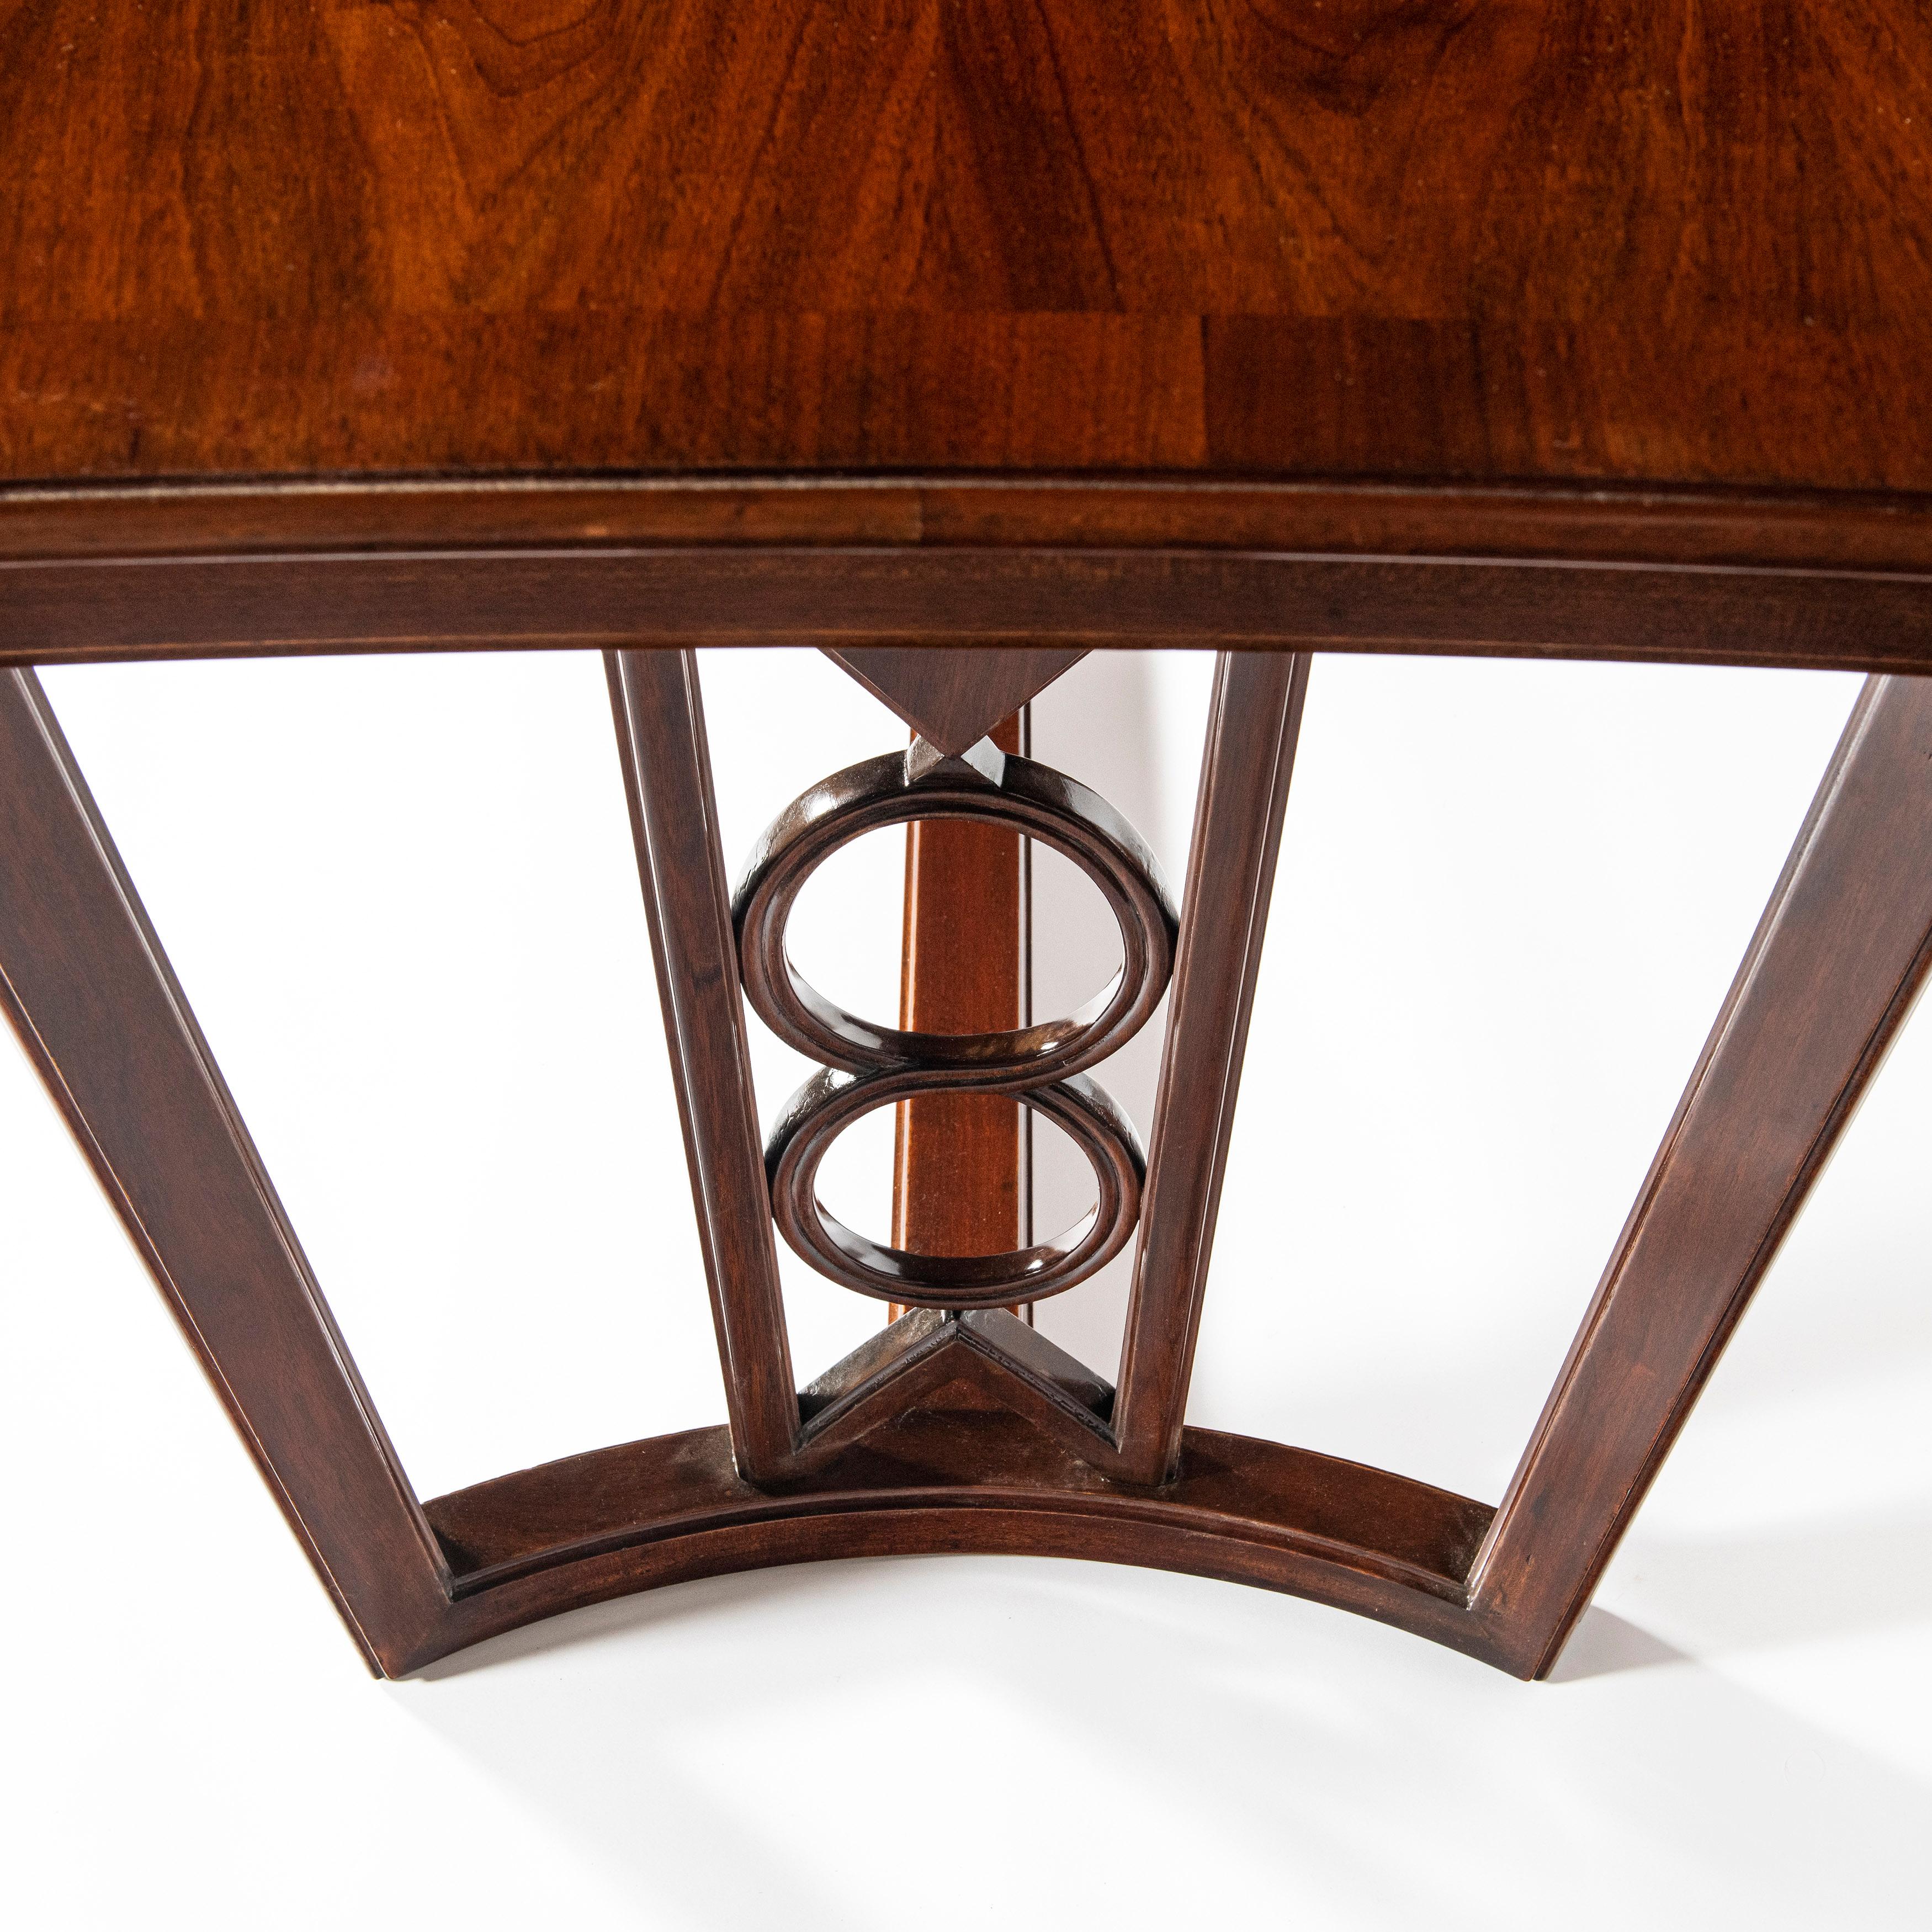 Mid-20th Century Wood and Glass Dining Room Table by Englander & Bonta, Argentina, circa 1950 For Sale